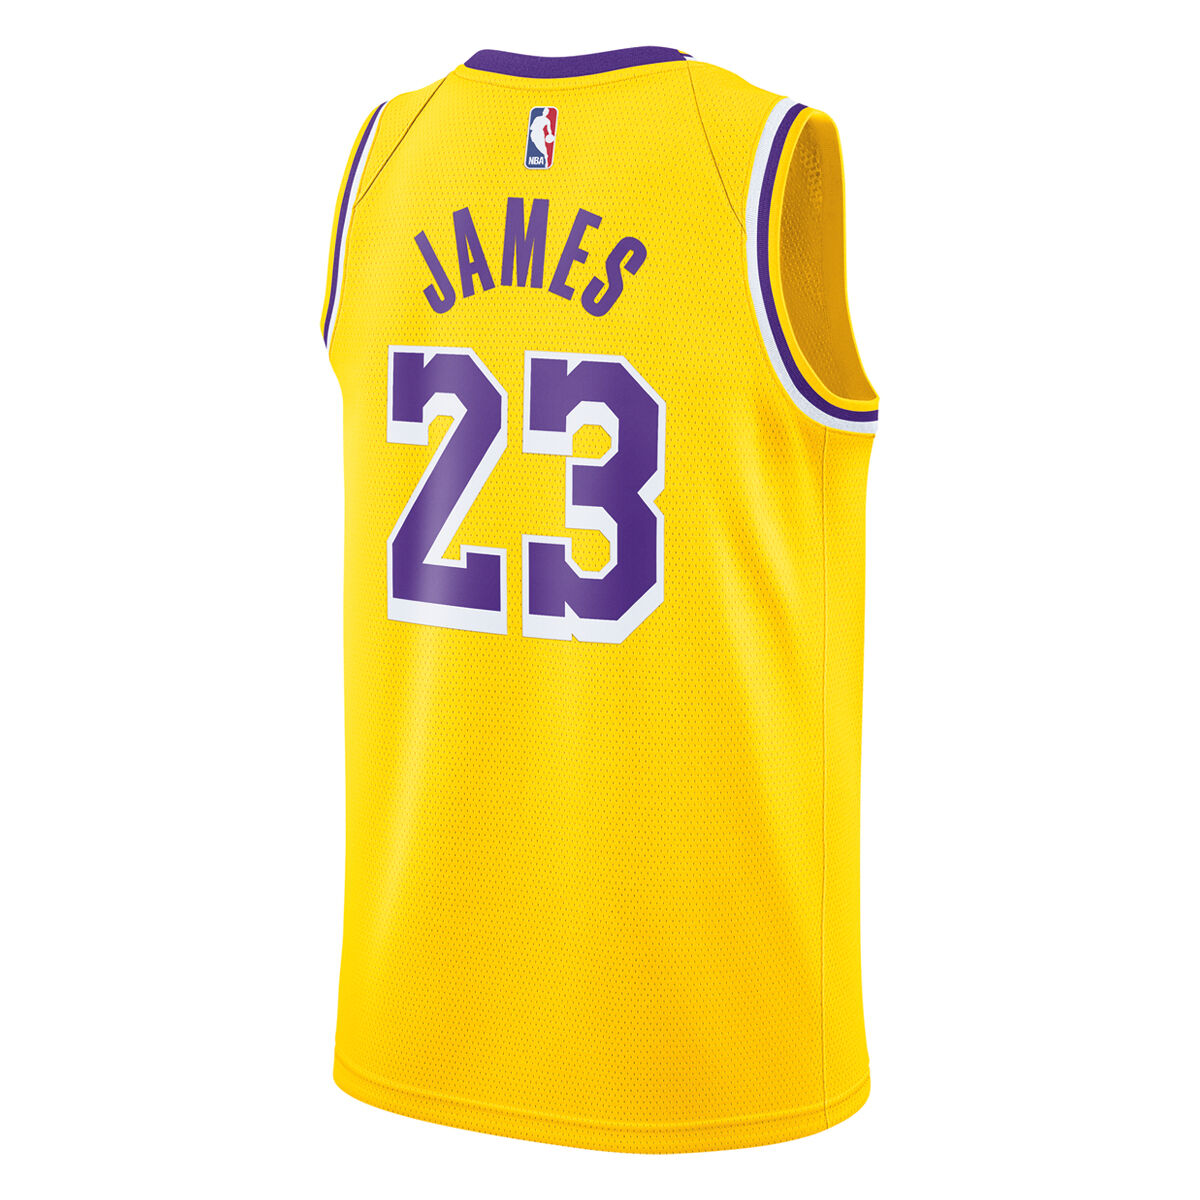 lebron jersey outfit